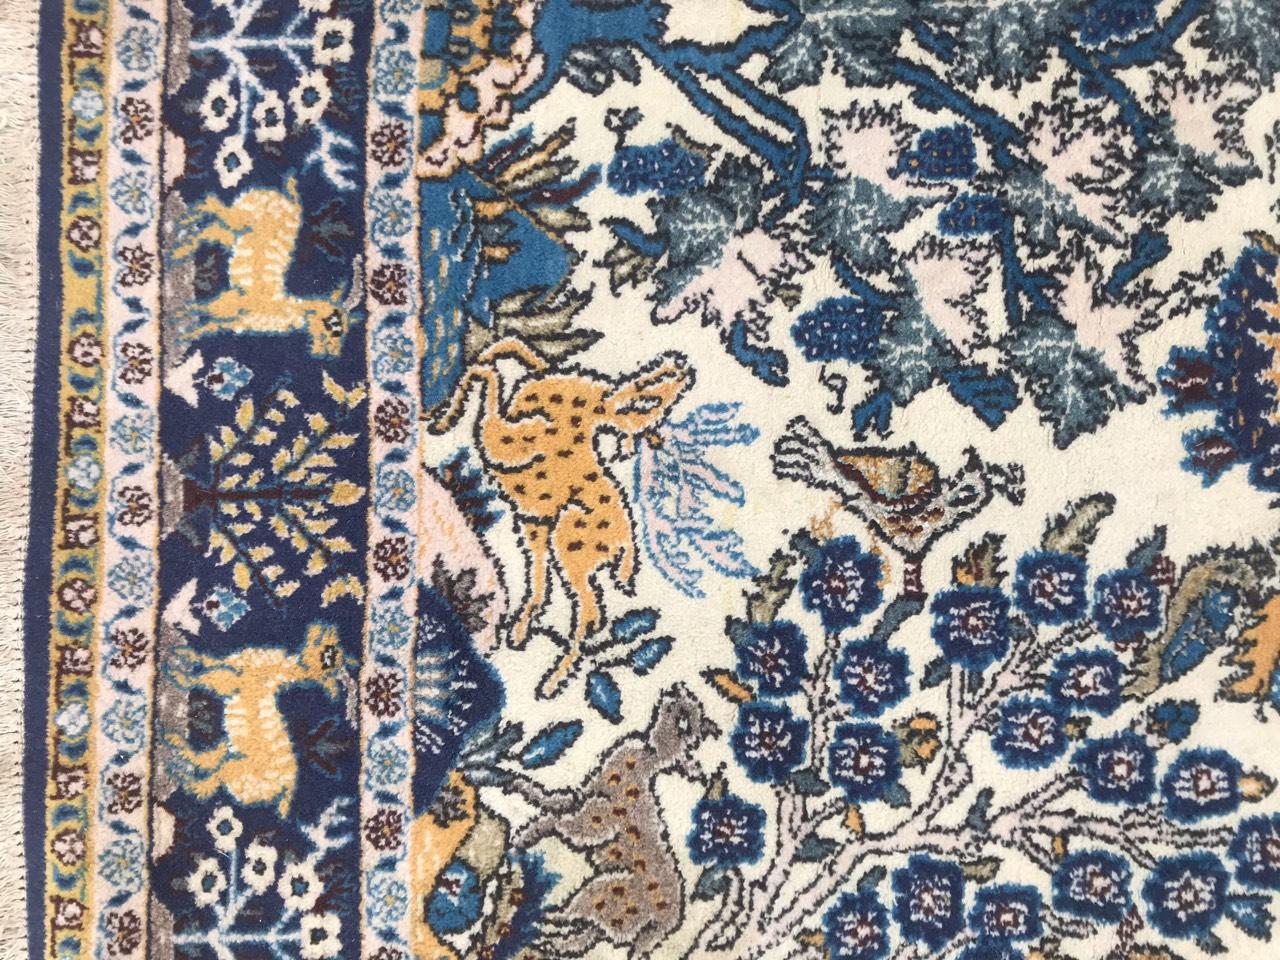 Very beautiful 20th century rug with a nice garden design with birds and animals, and light patterns and colors, with blue, green and yellow. Entirely hand knotted with wool velvet on cotton foundation.